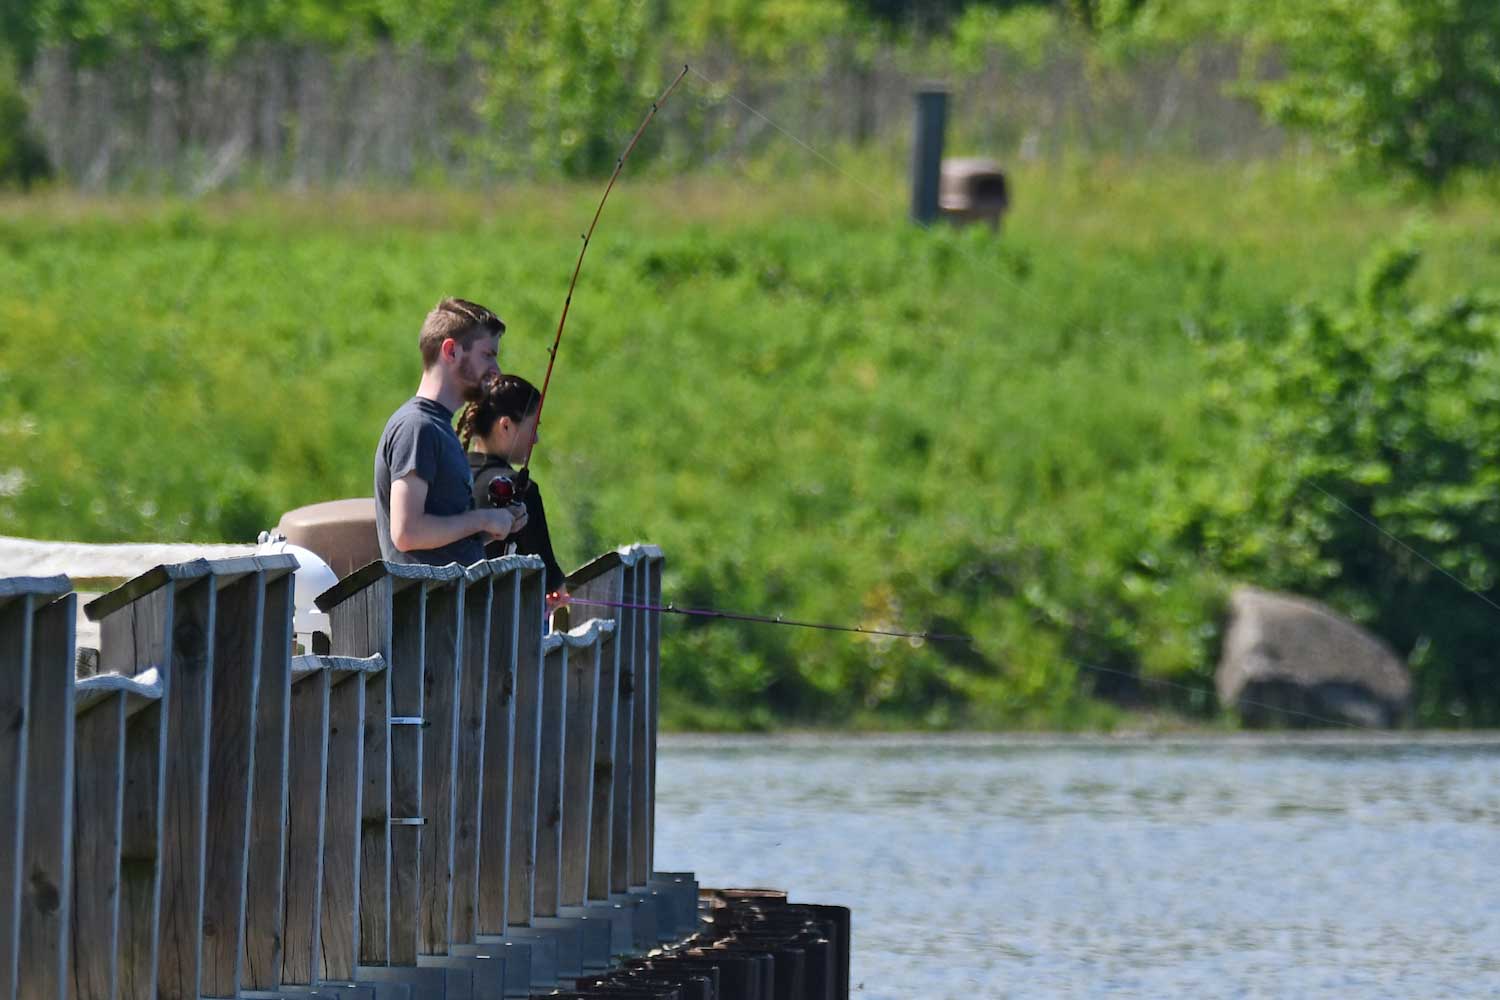 Two people fishing from behind a wall along a shoreline.